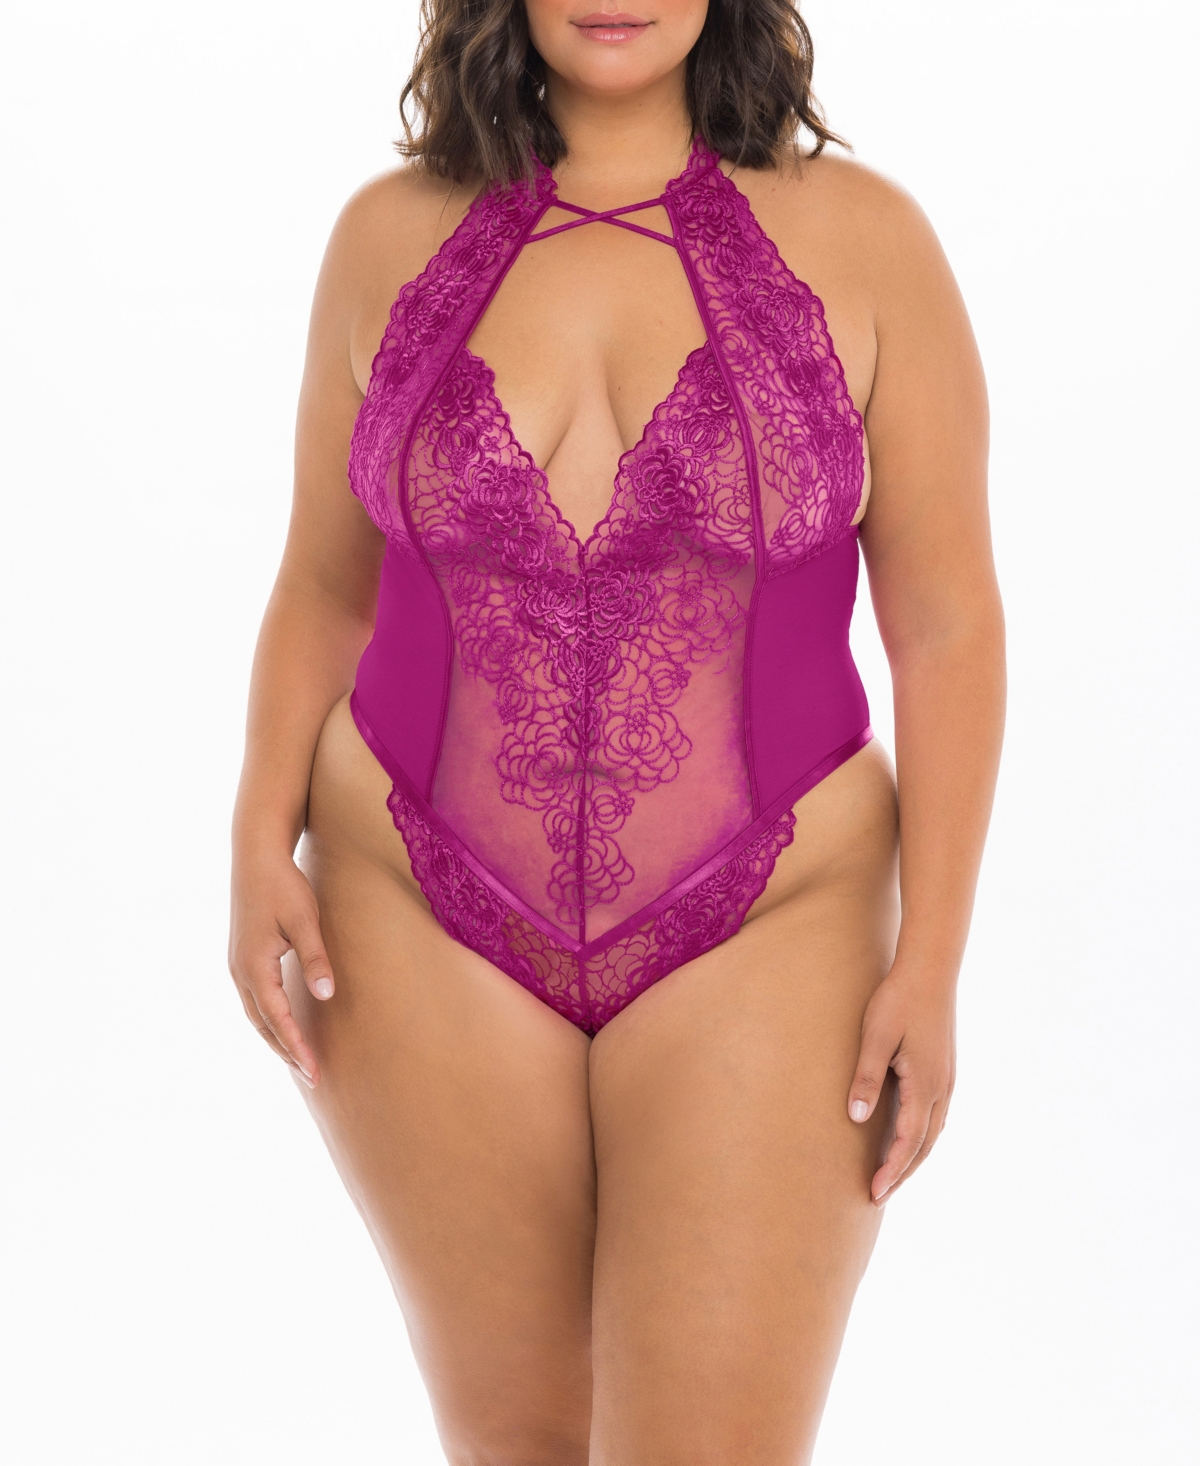 Plus Size High Neck Soft Embroidered Teddy with Crossing Elastic Details - Festival Fuchsia